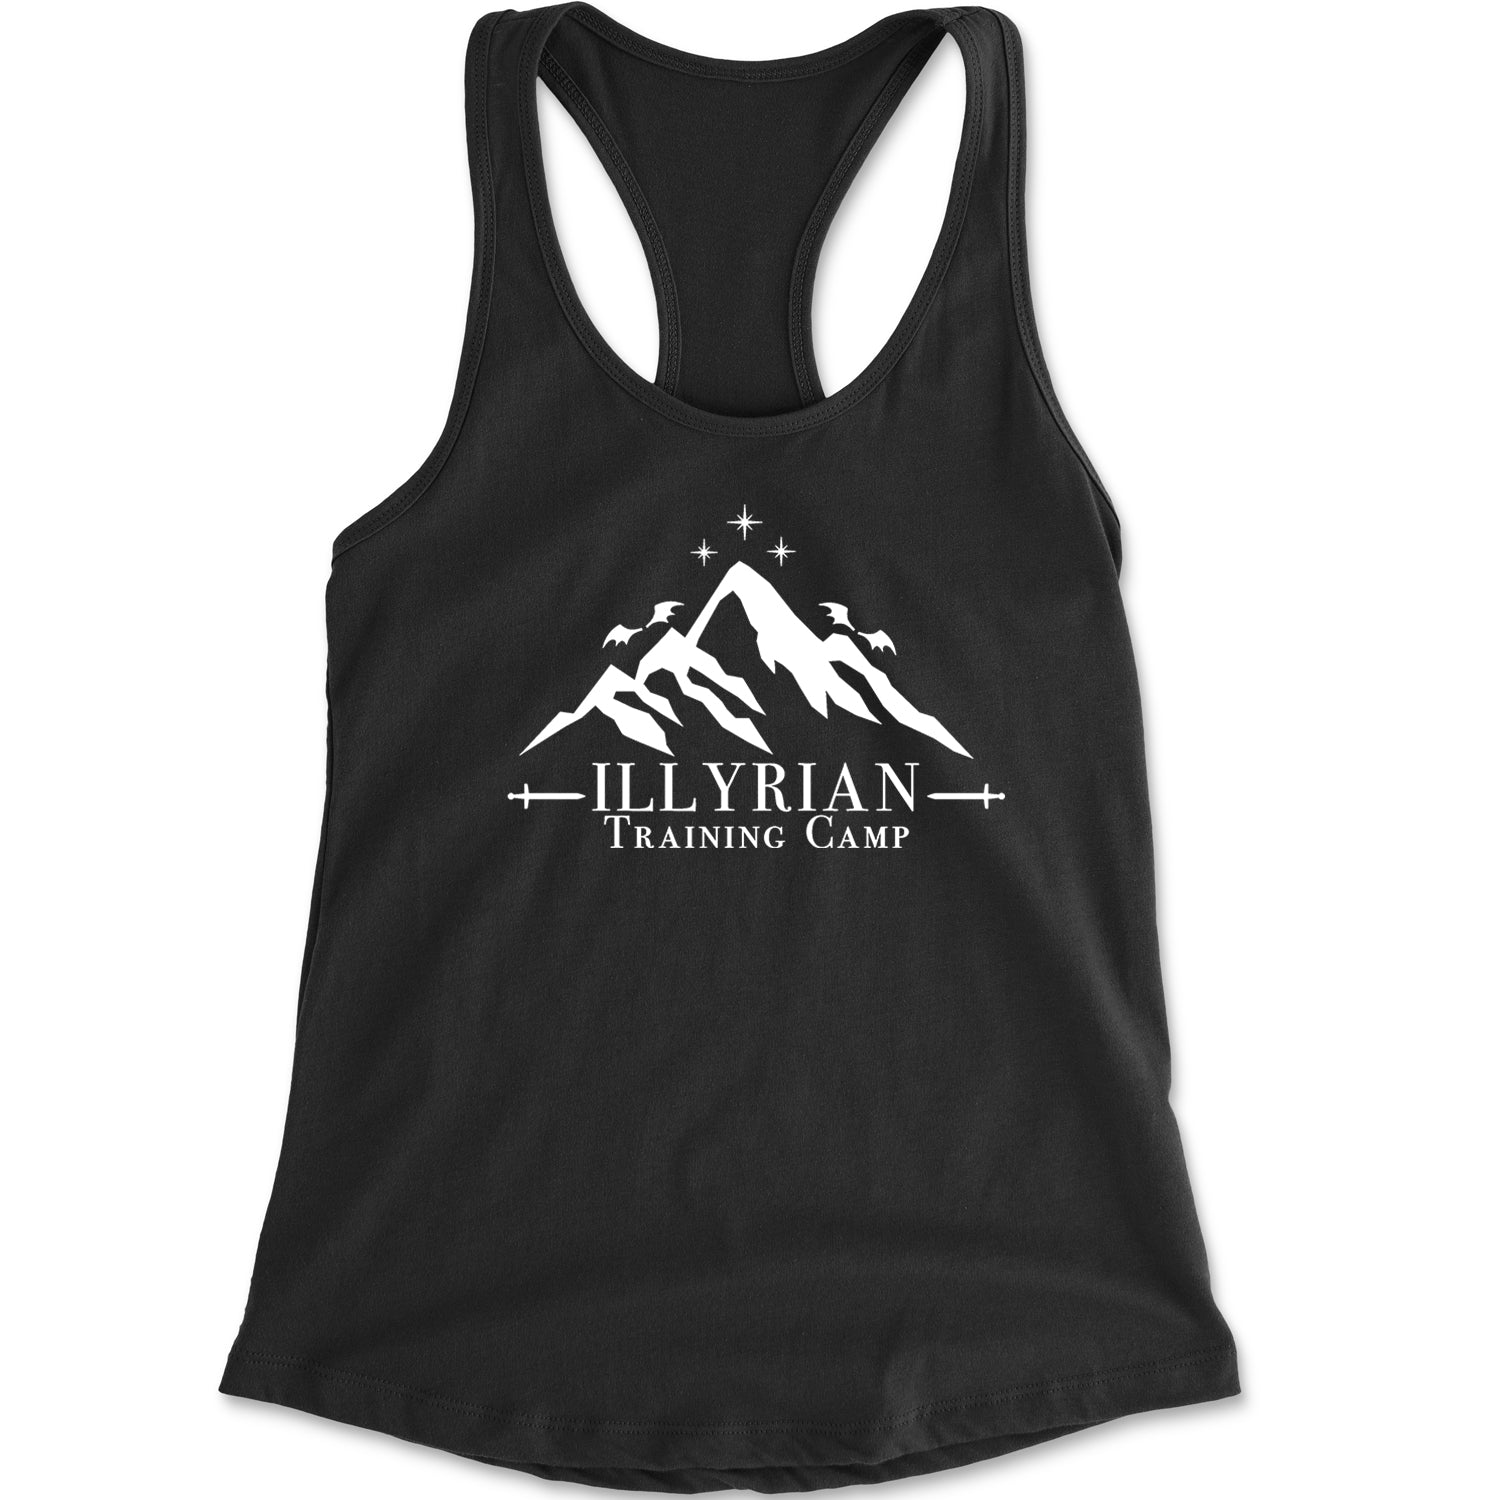 Illyrian Training Camp Night Court Racerback Tank Top for Women